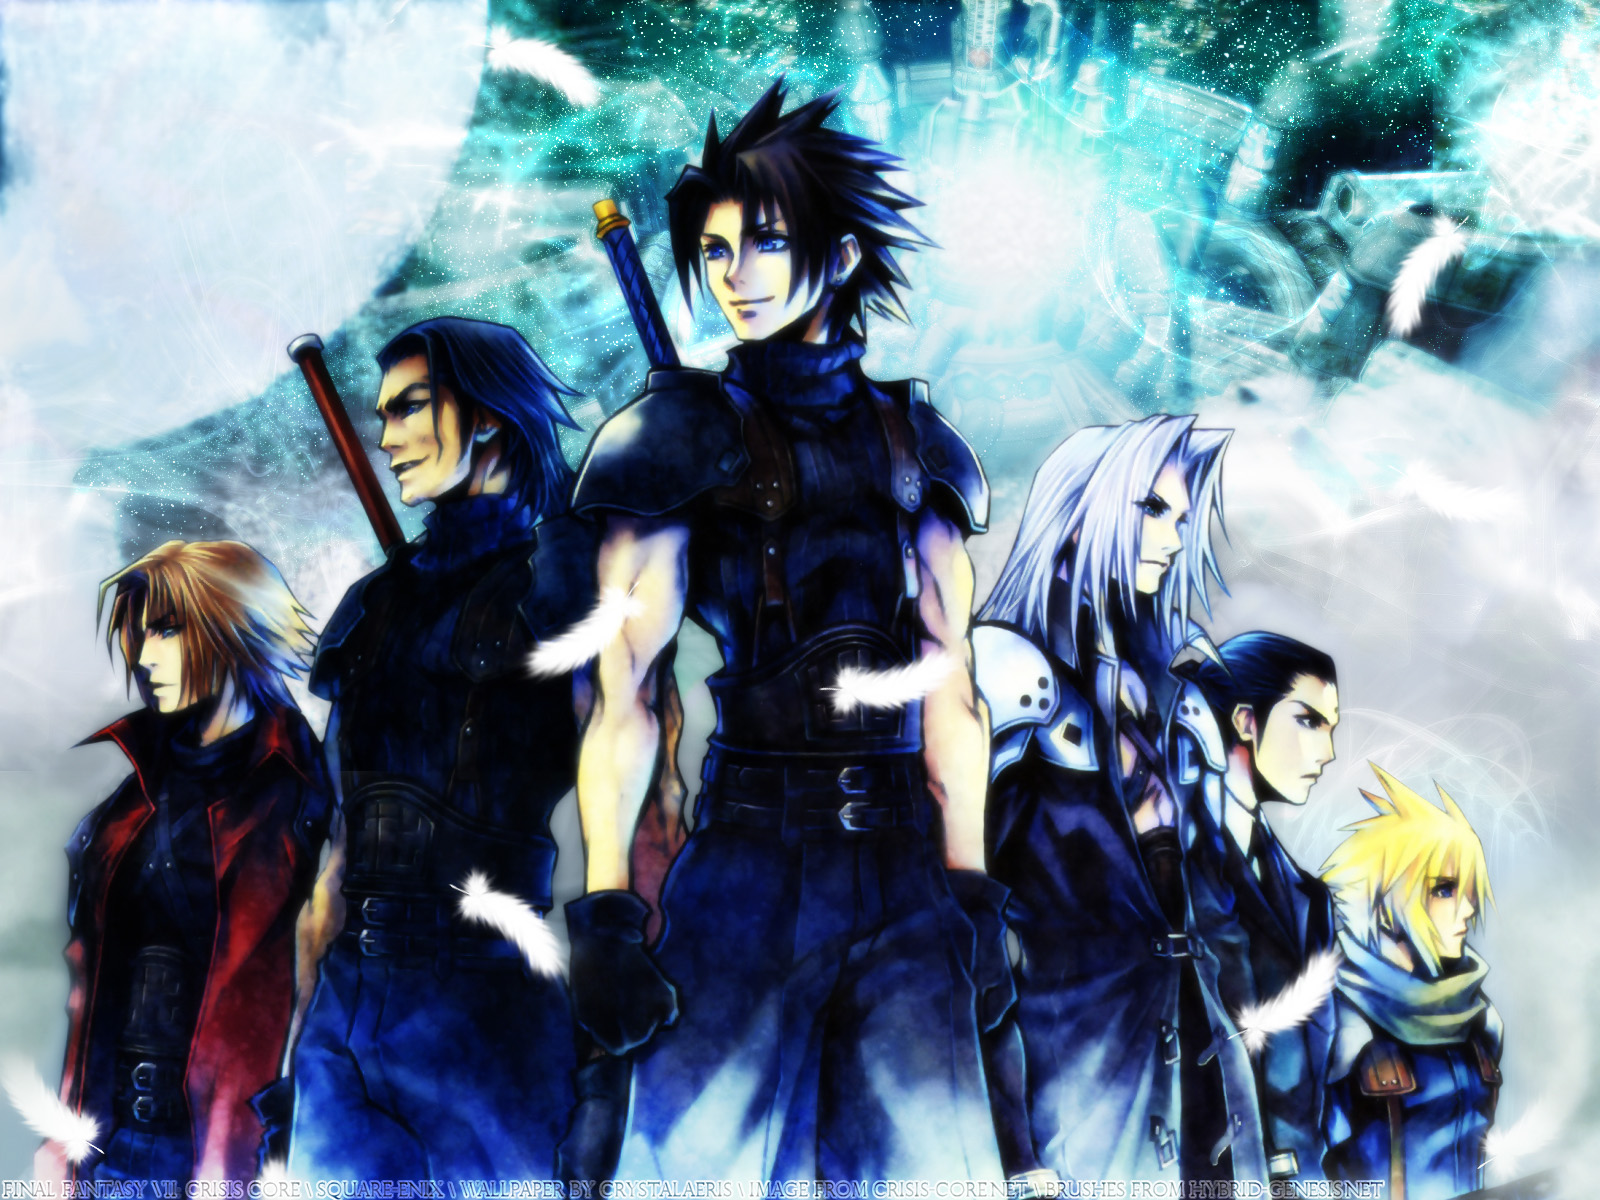 Group of popular Final Fantasy characters including Zack, Angeal, Sephiroth, Genesis, and Cloud.